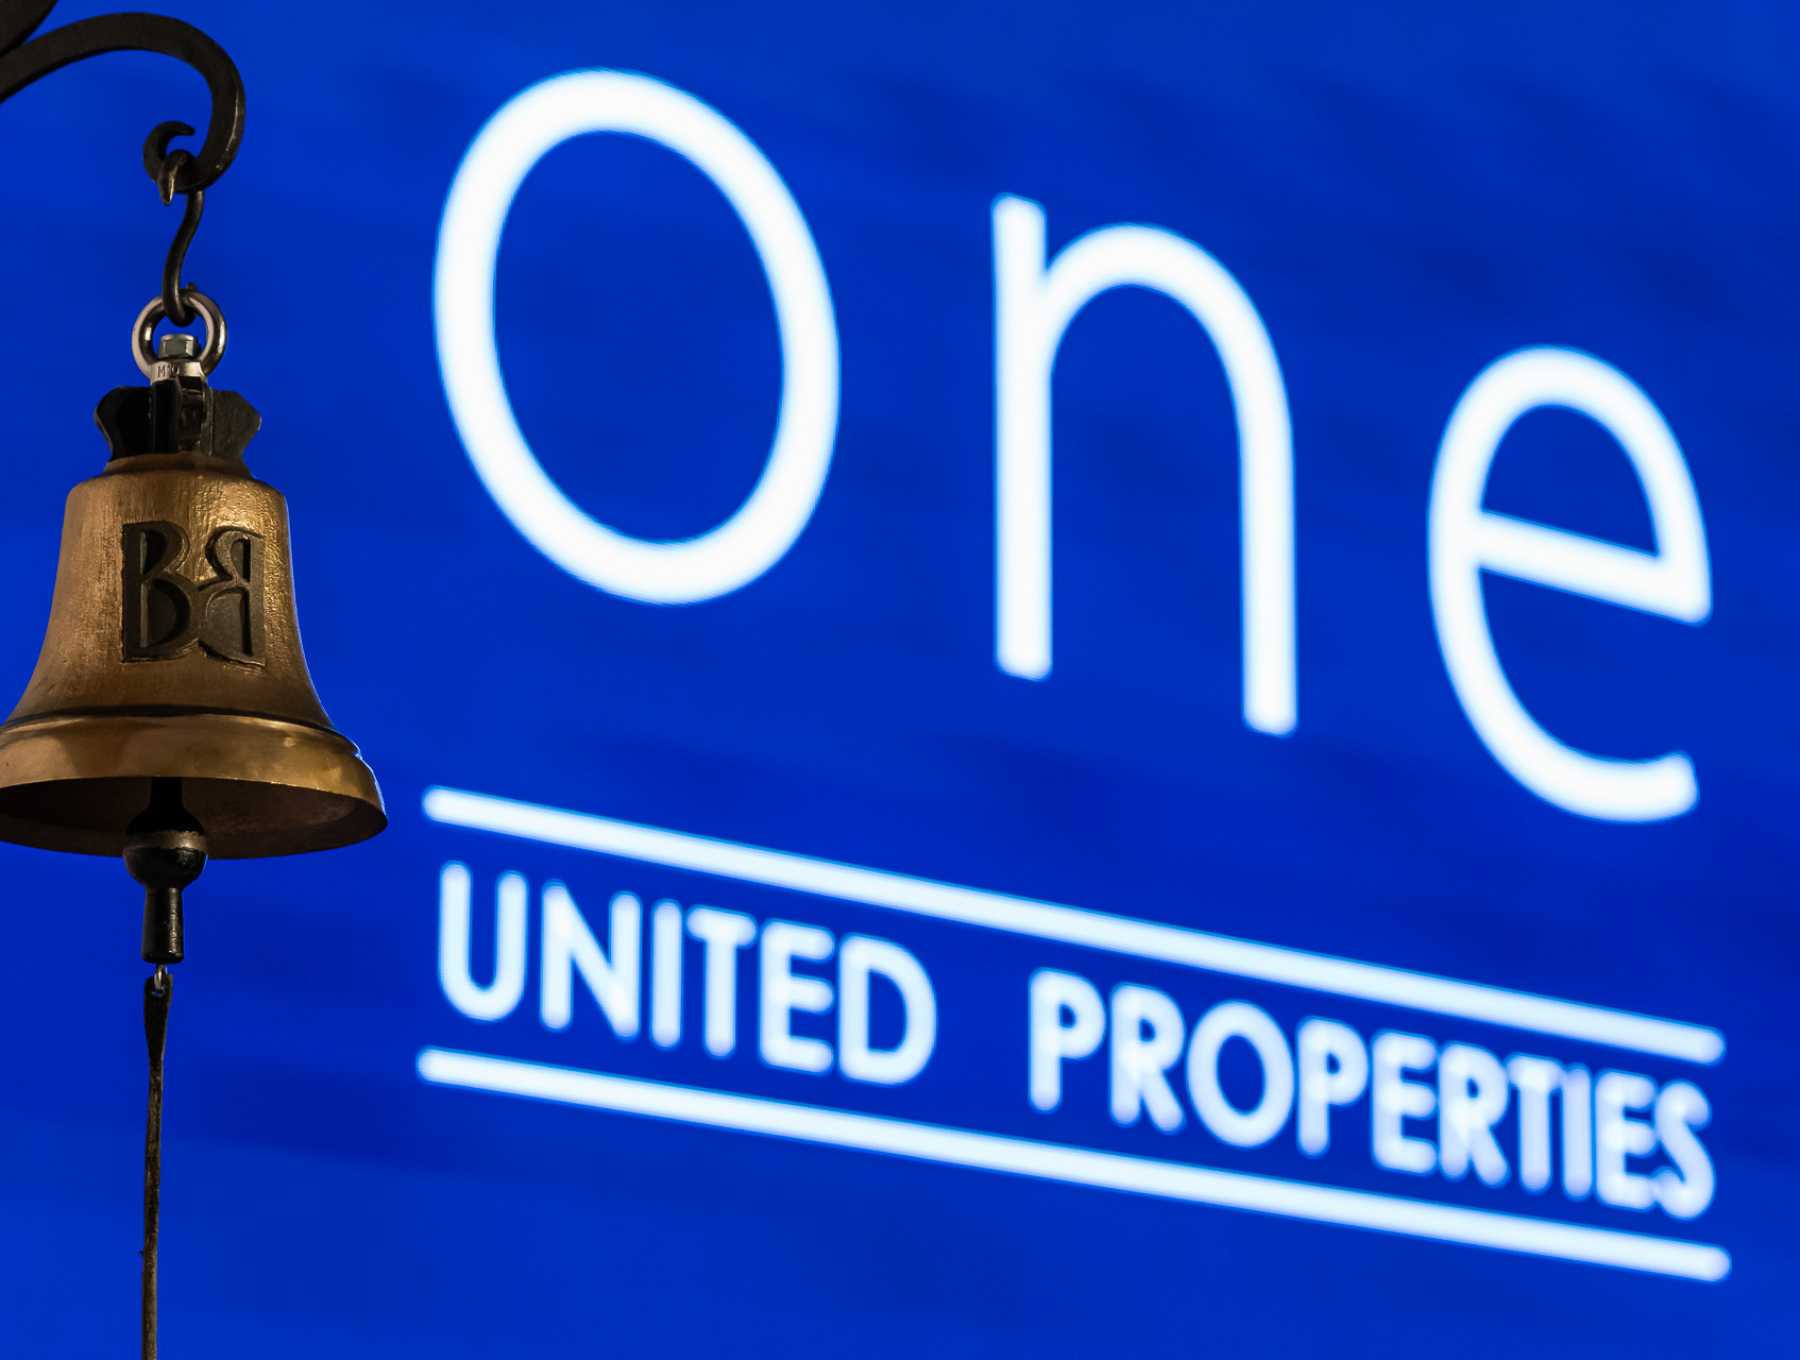 One United Properties closes the first stage of the share capital increase, raising 14.4 million euro from the existing shareholders